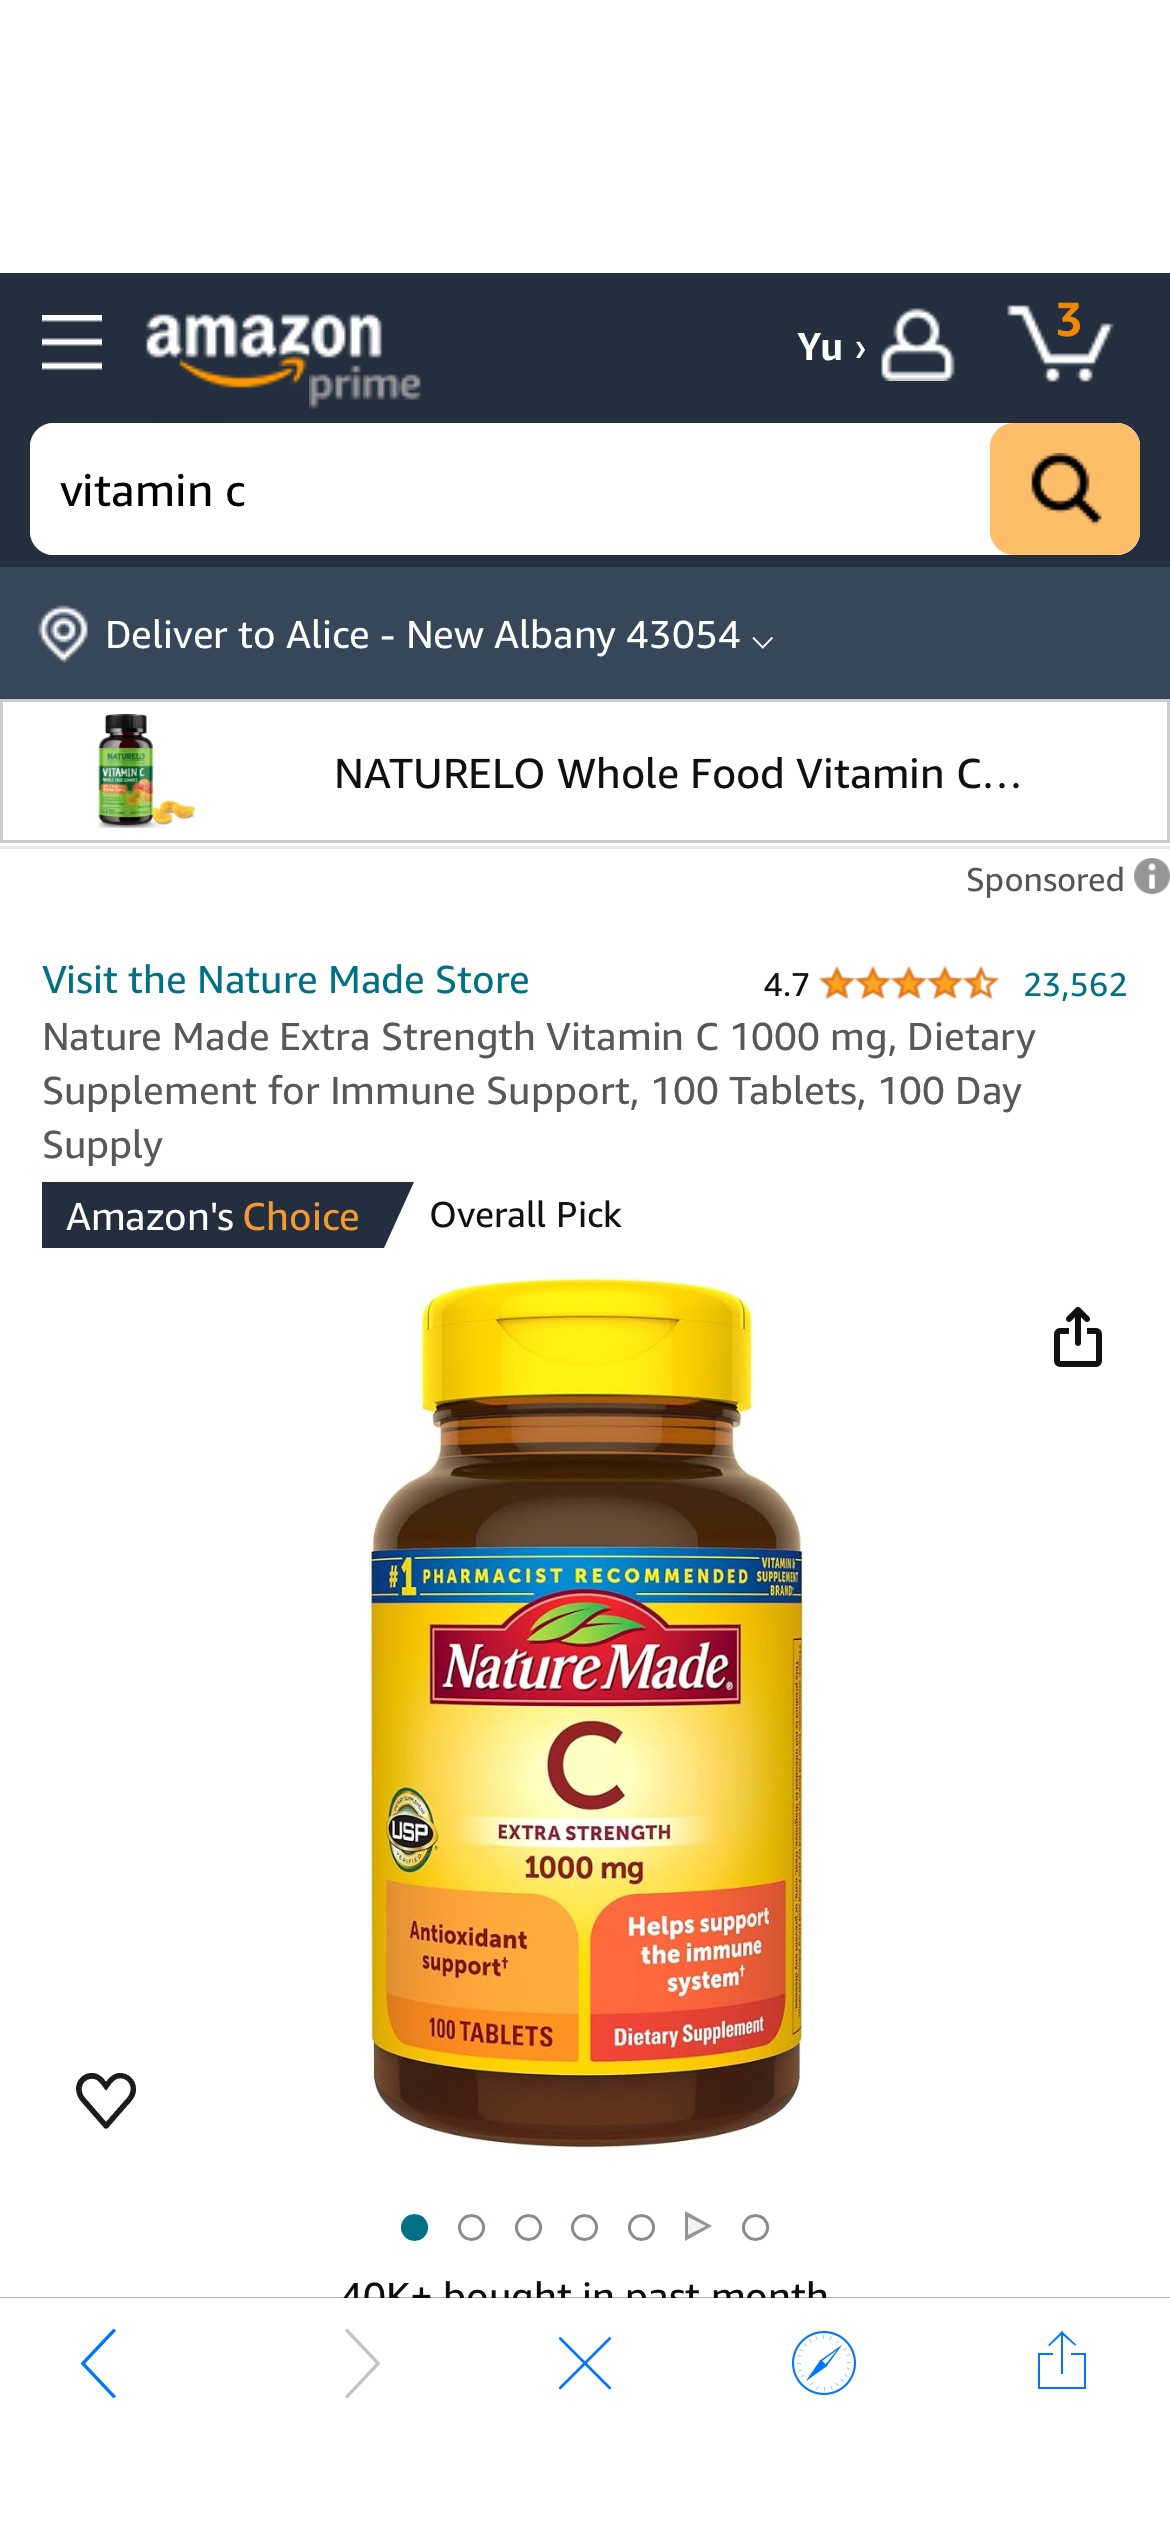 Amazon.com: Nature Made Extra Strength Vitamin C 1000 mg, Dietary Supplement for Immune Support, 100 Tablets, 100 Day Supply : Health & Household